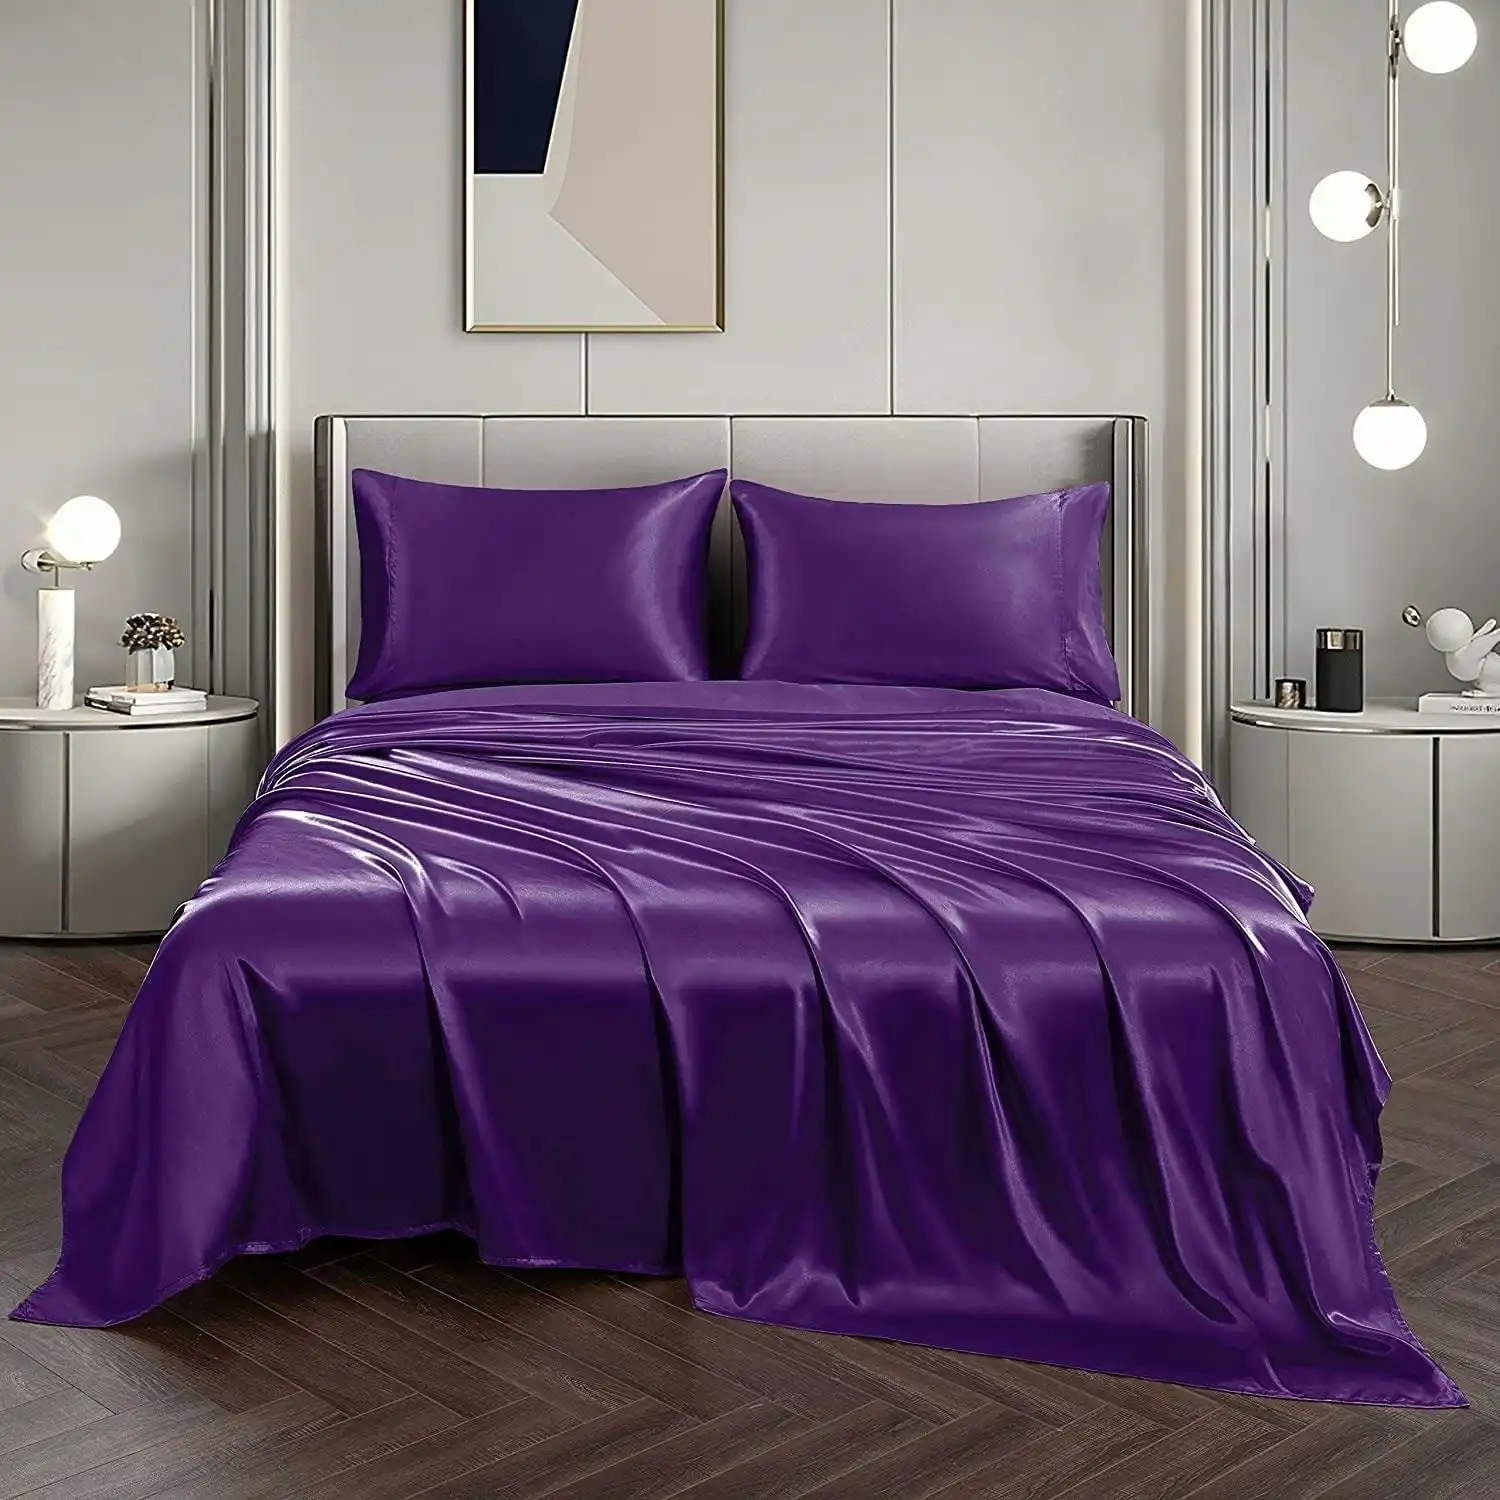 Soft Silky Satin Sheet Set 4pc 2000TC Queen, Deep Pocket Flat Fitted Bed Sheets Purple